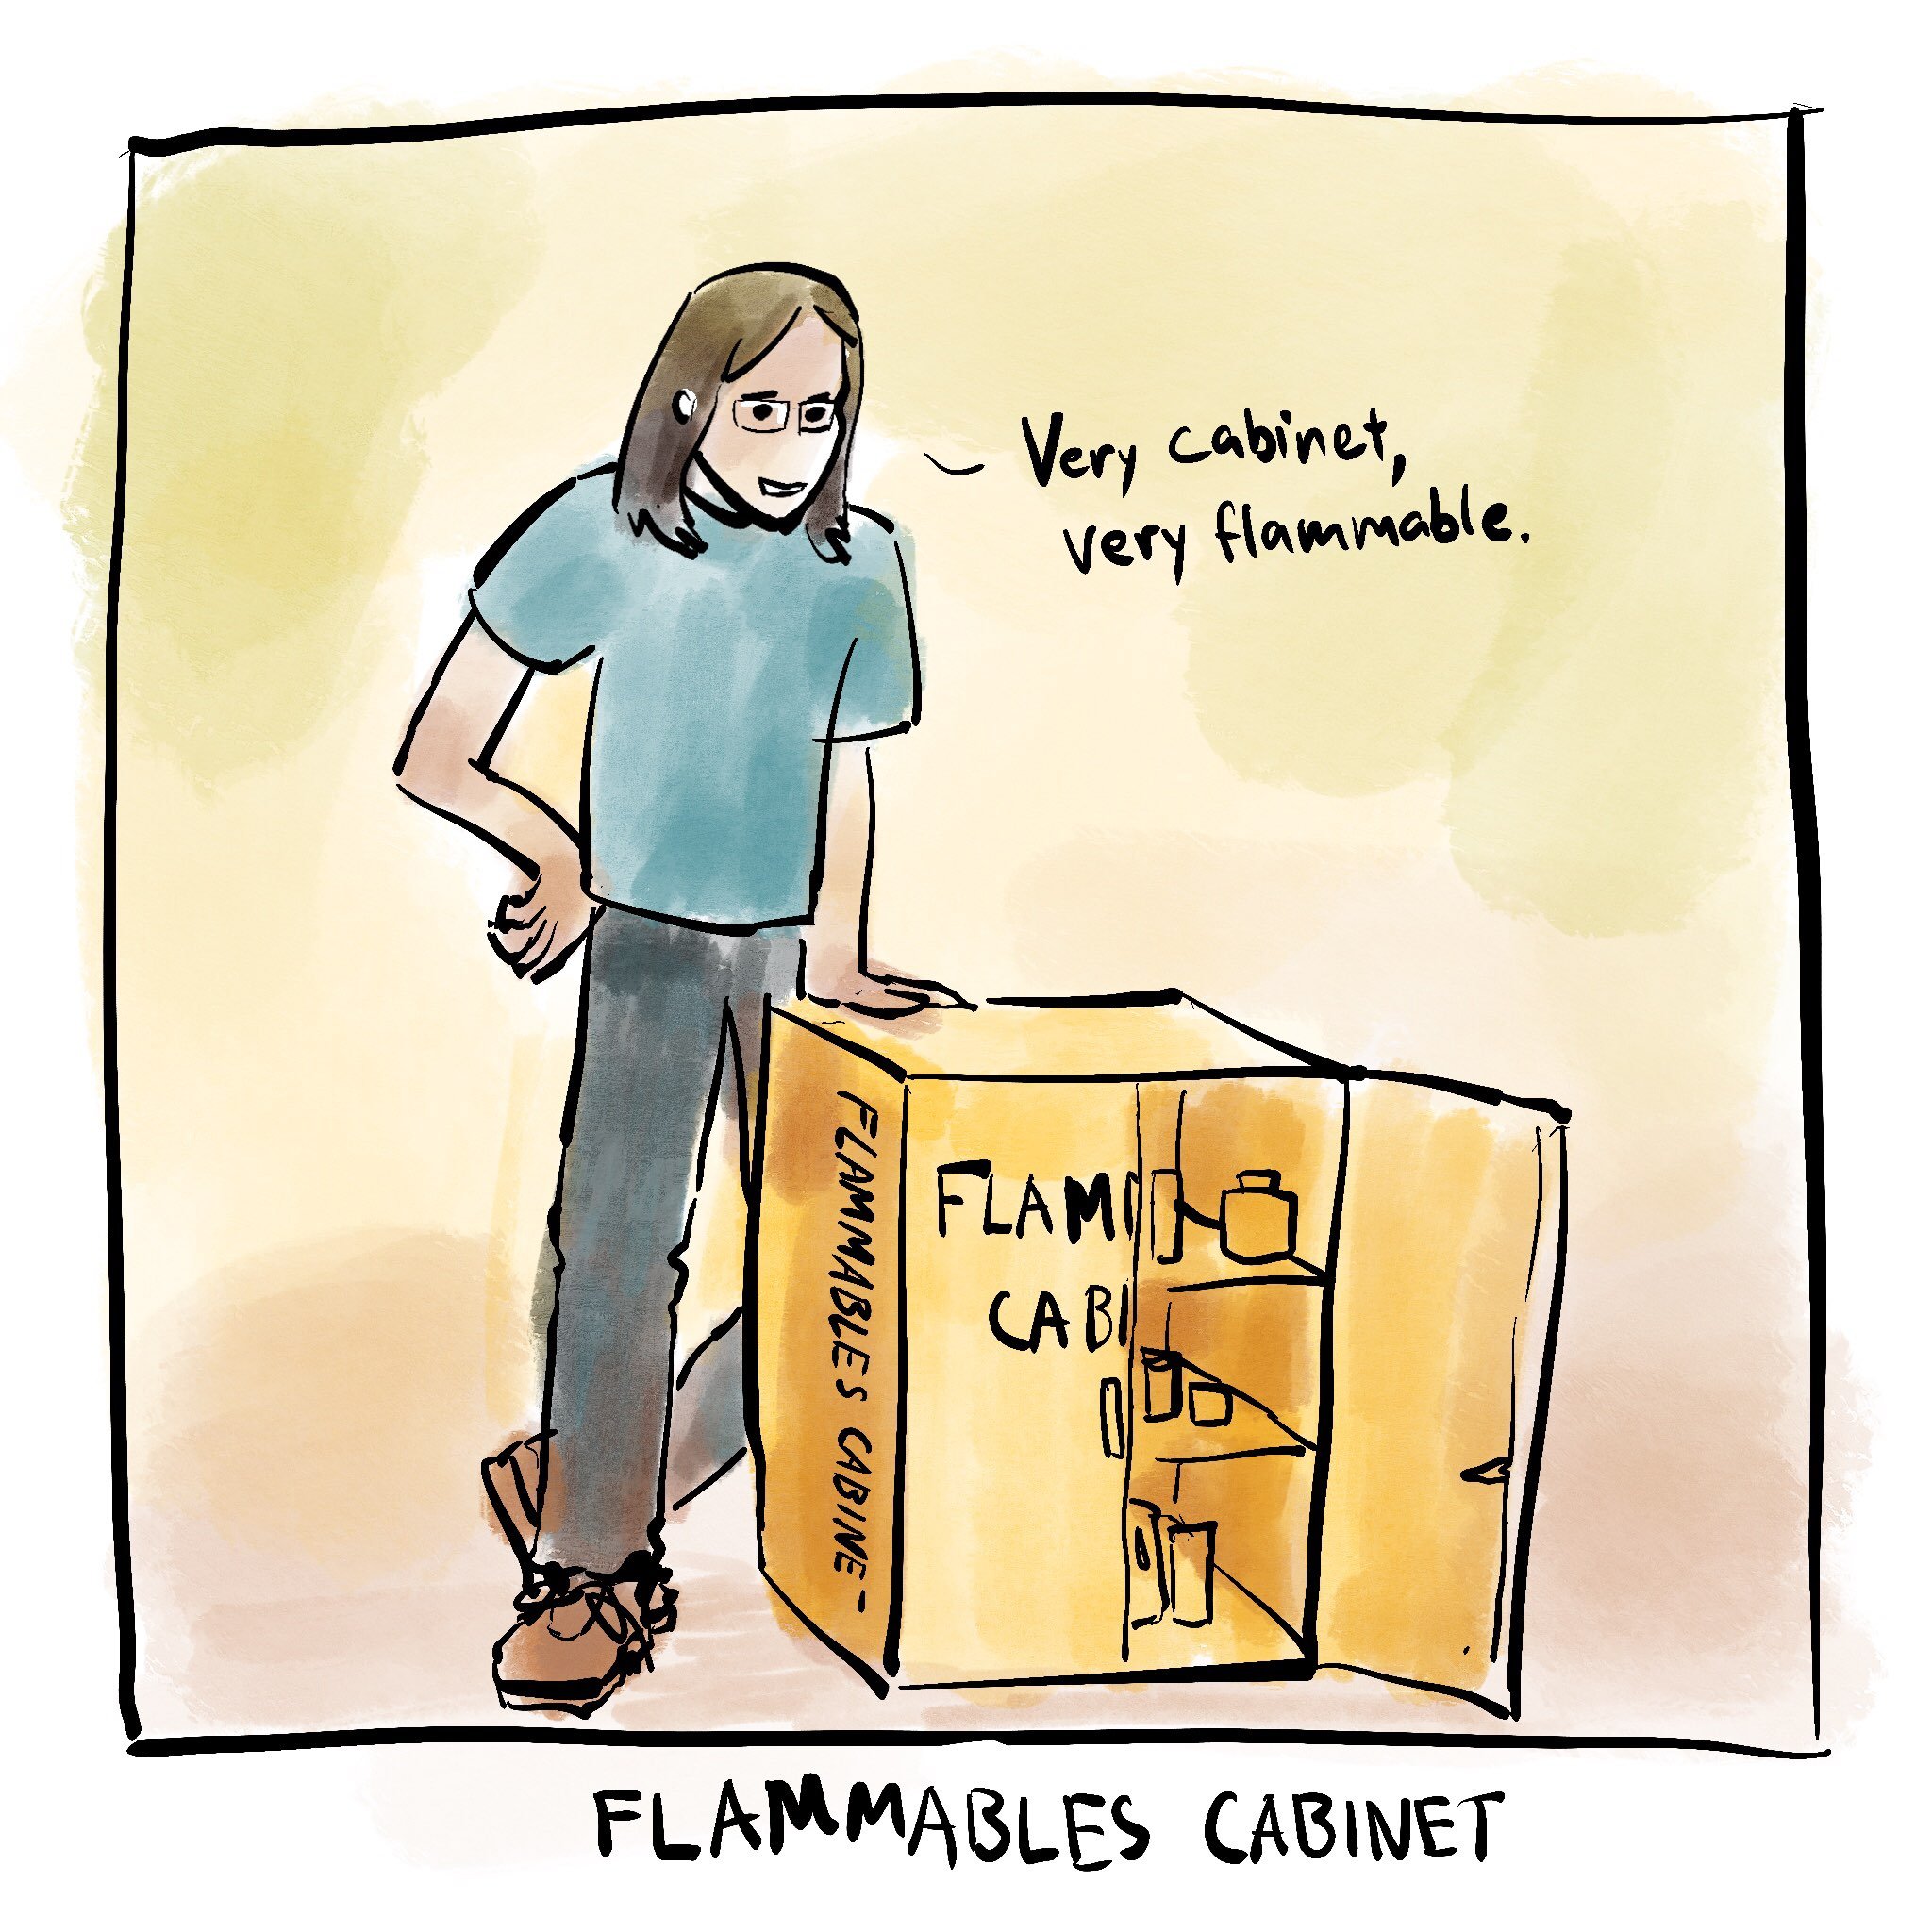 very cabinet, very flammable